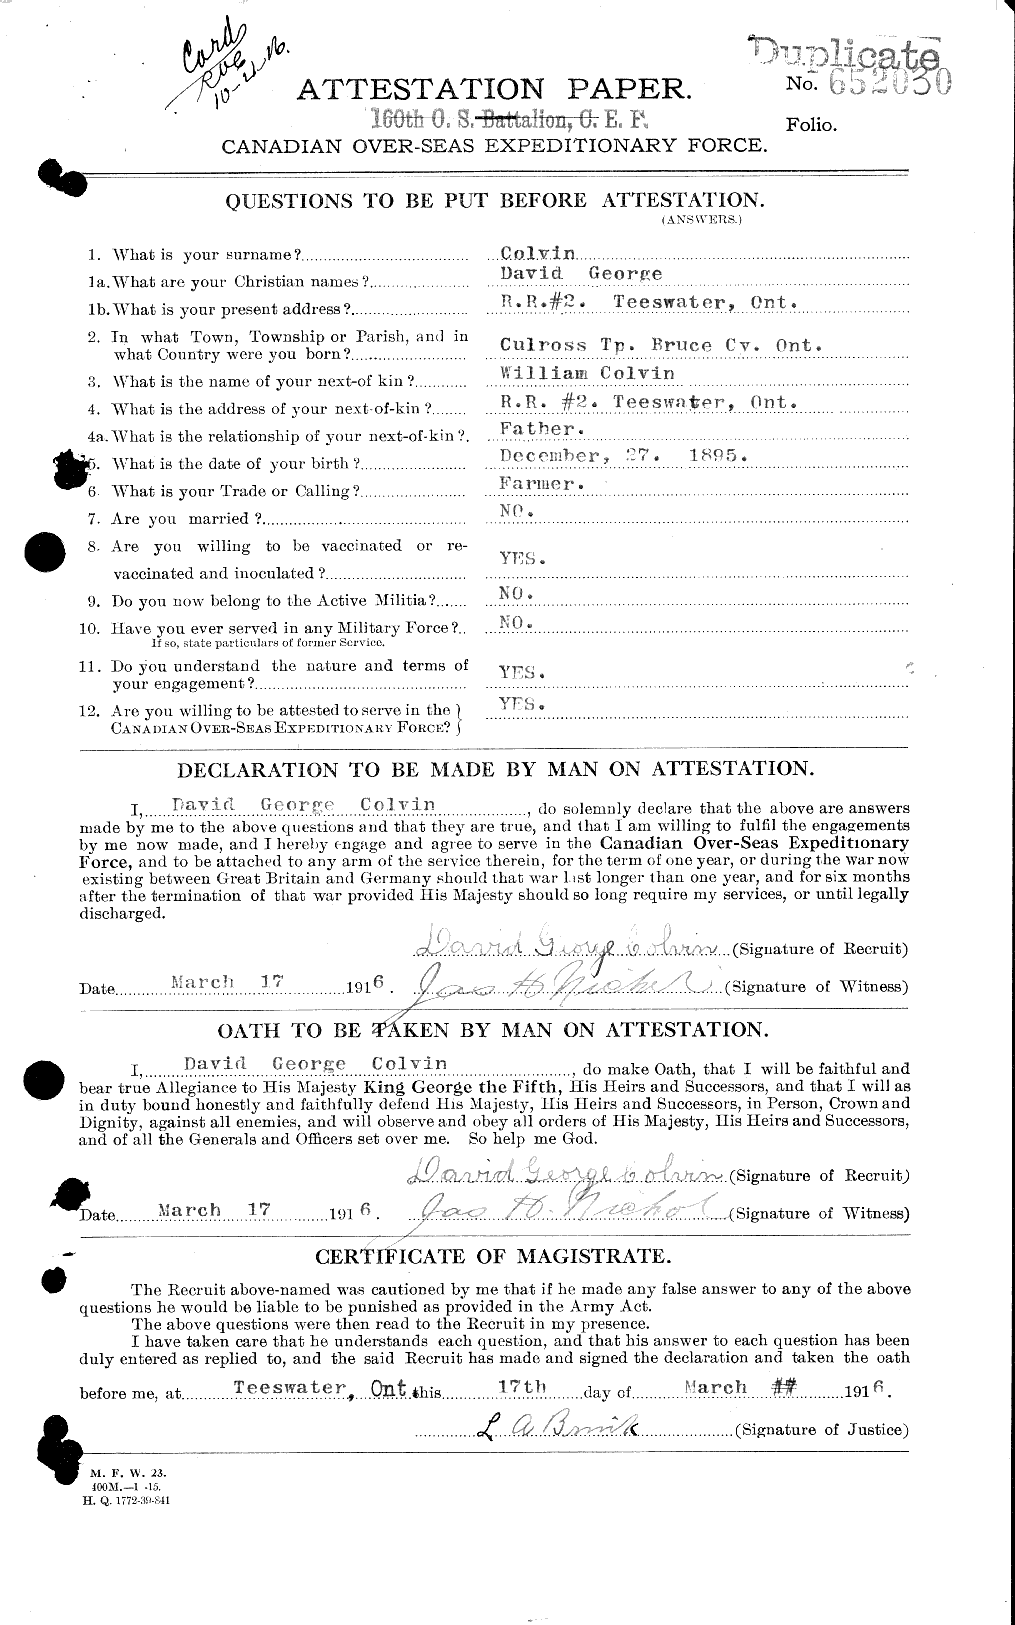 Personnel Records of the First World War - CEF 042510a